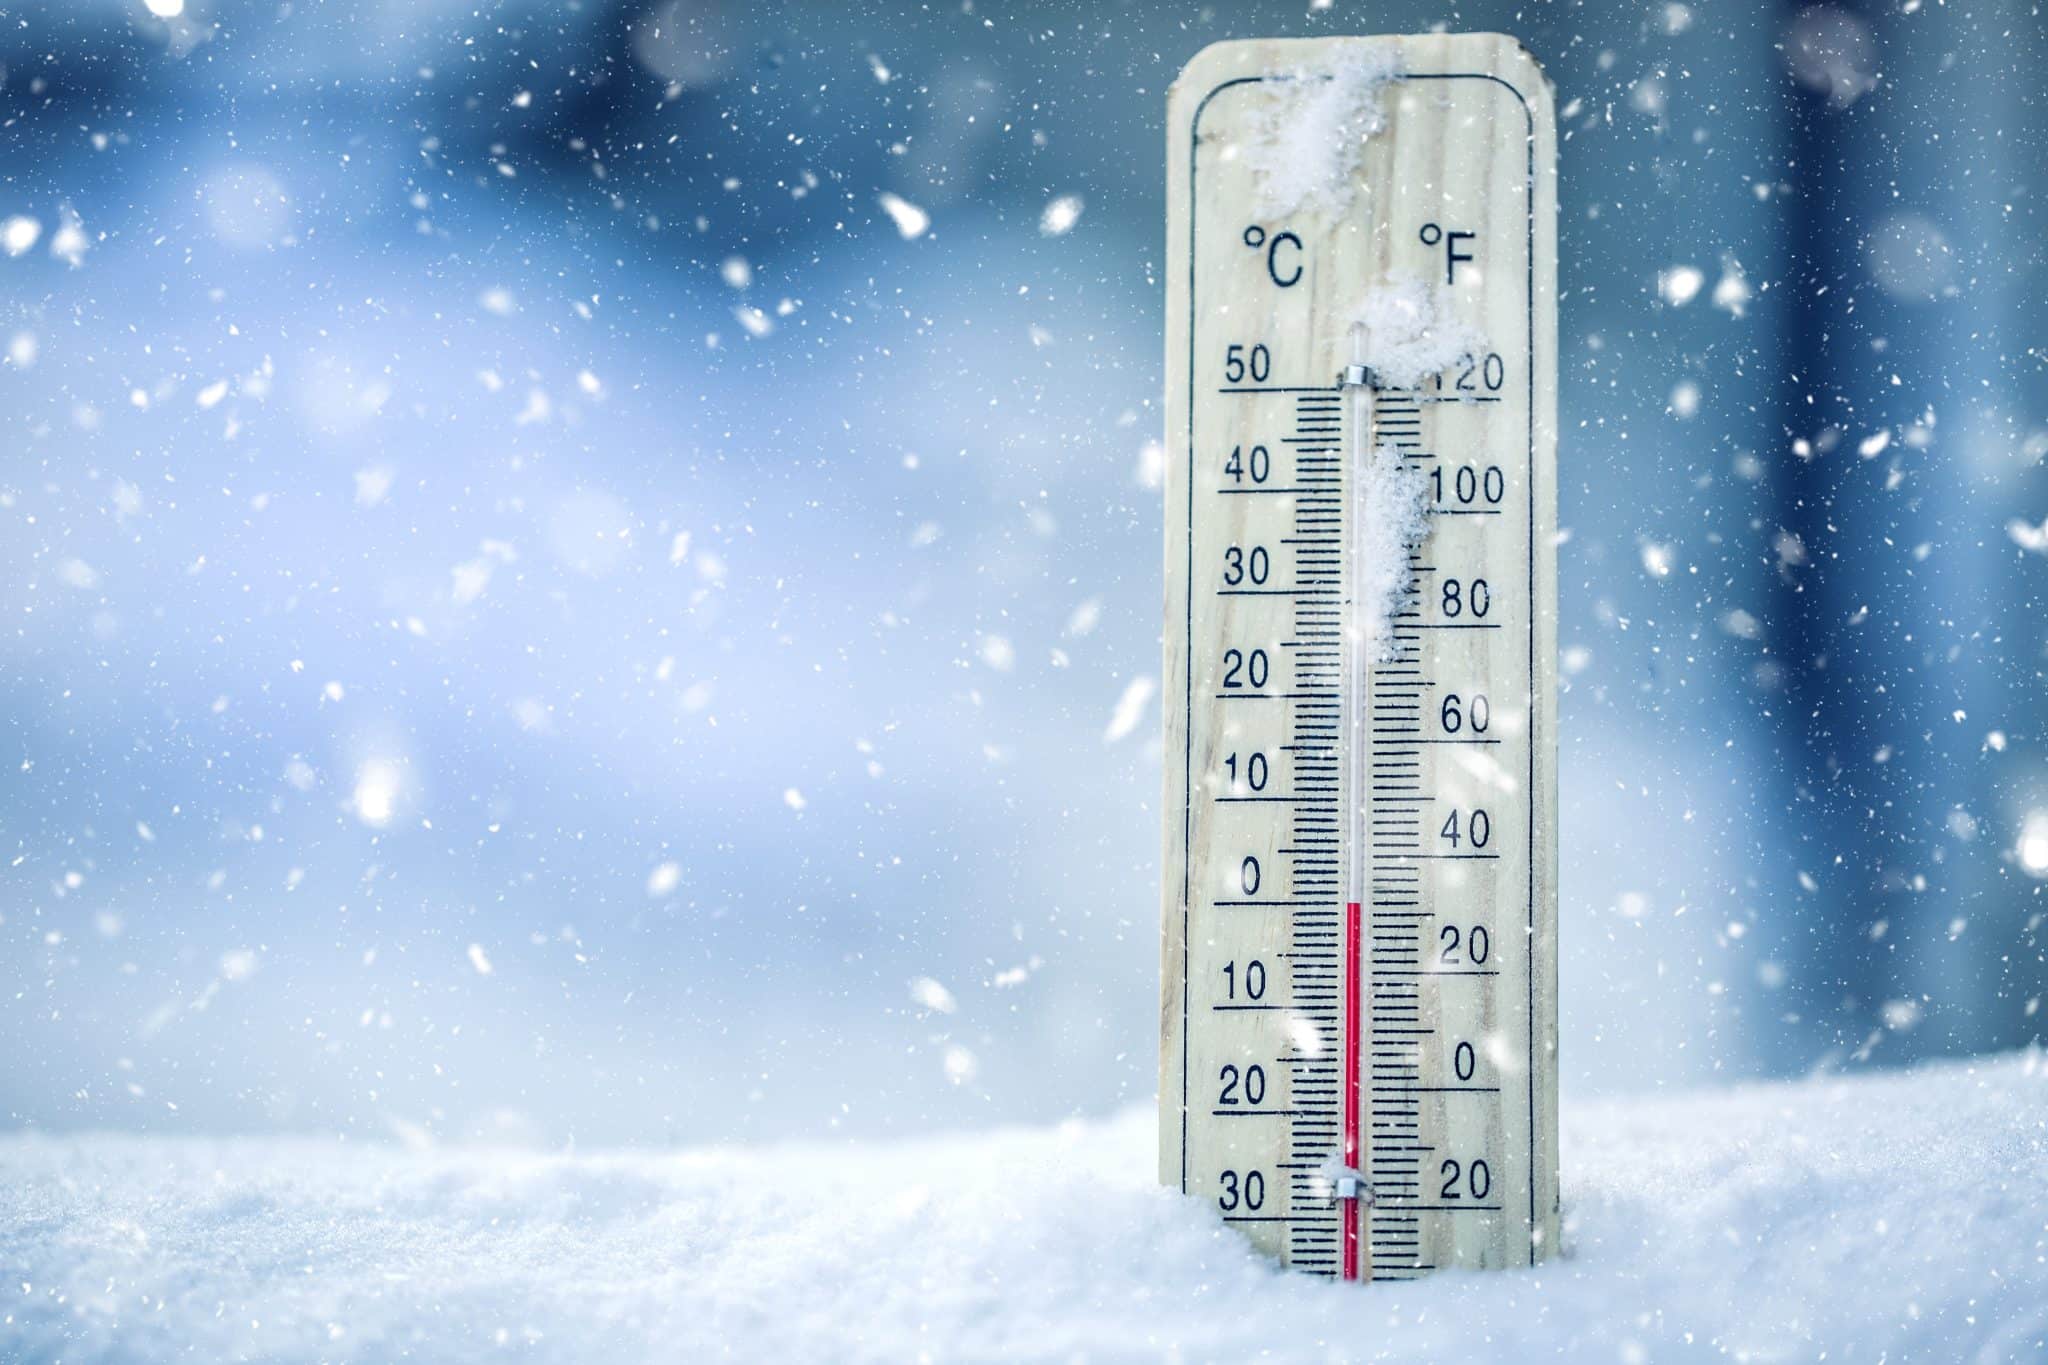 Atlanta Will Open a Warming Center for the Next Three Nights